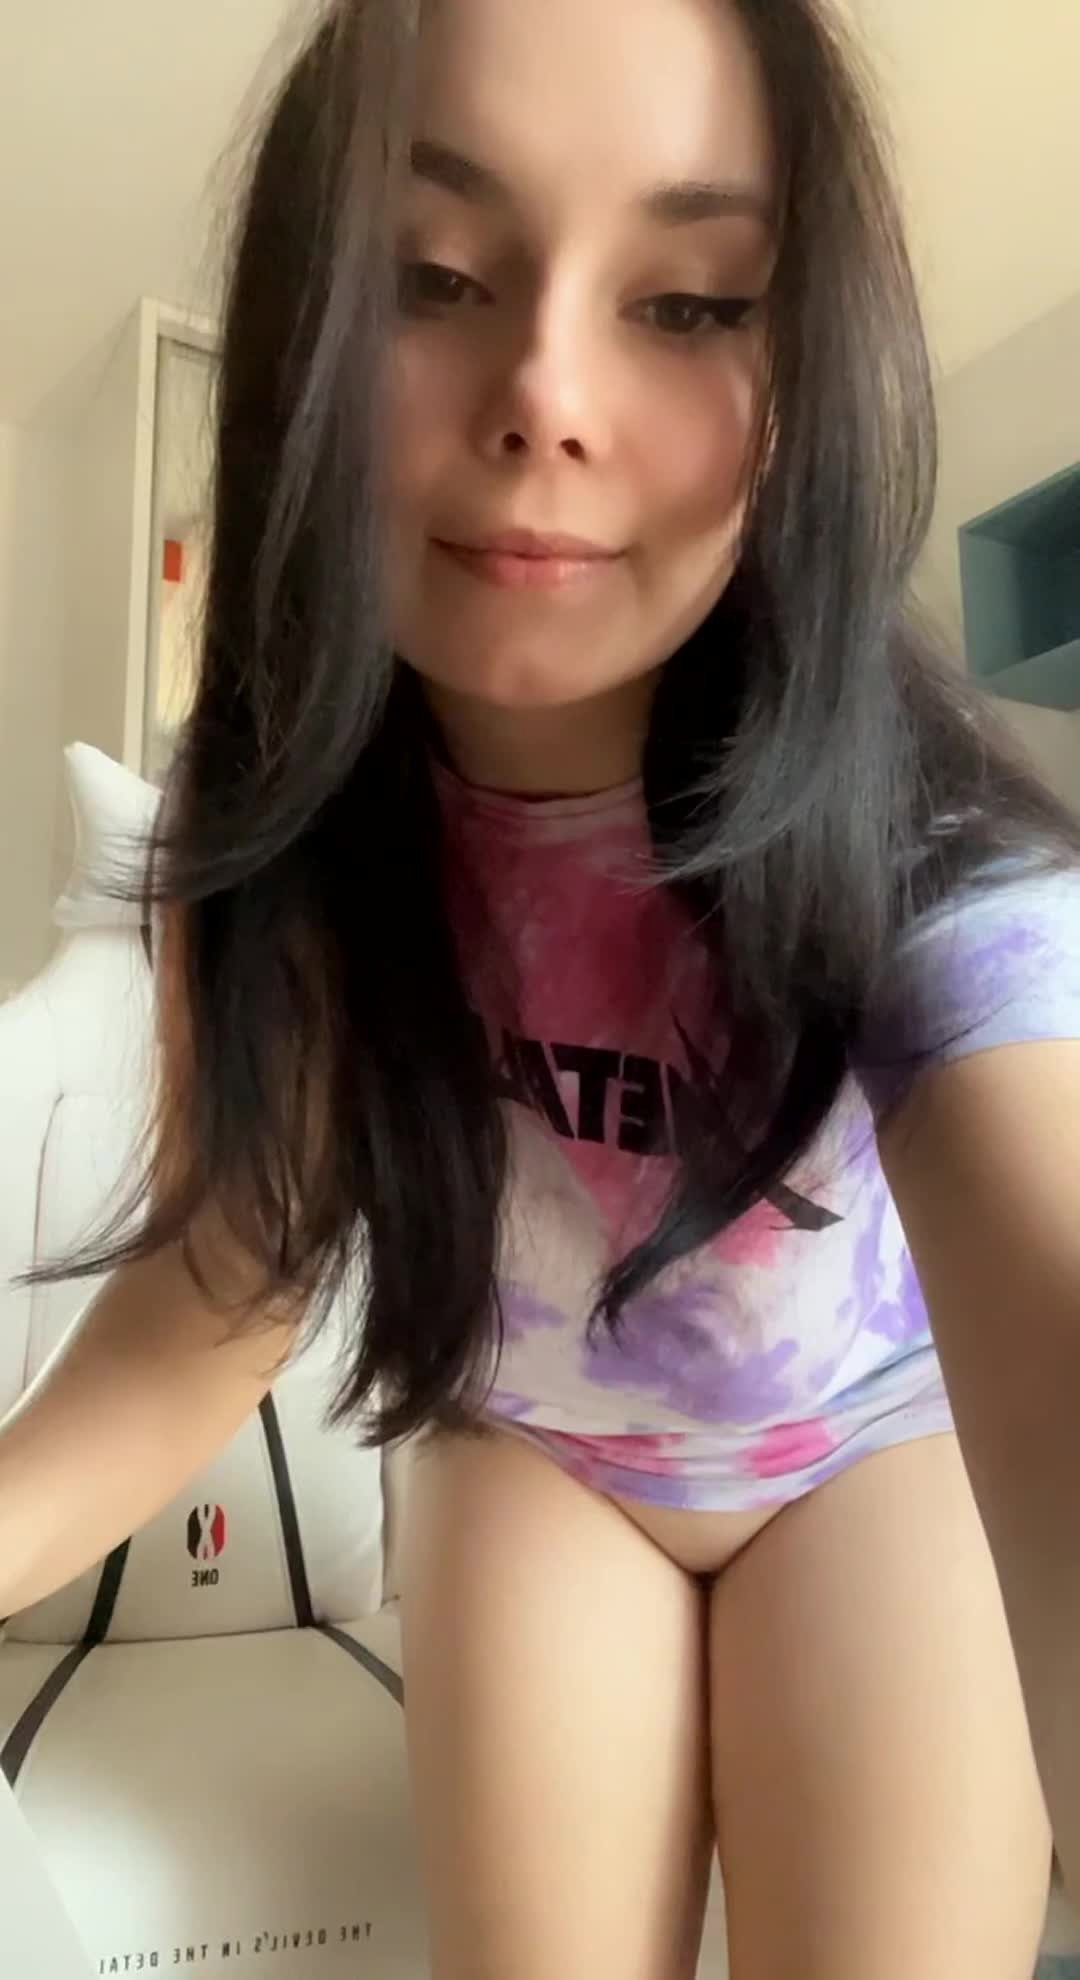 Video post by PervyMary